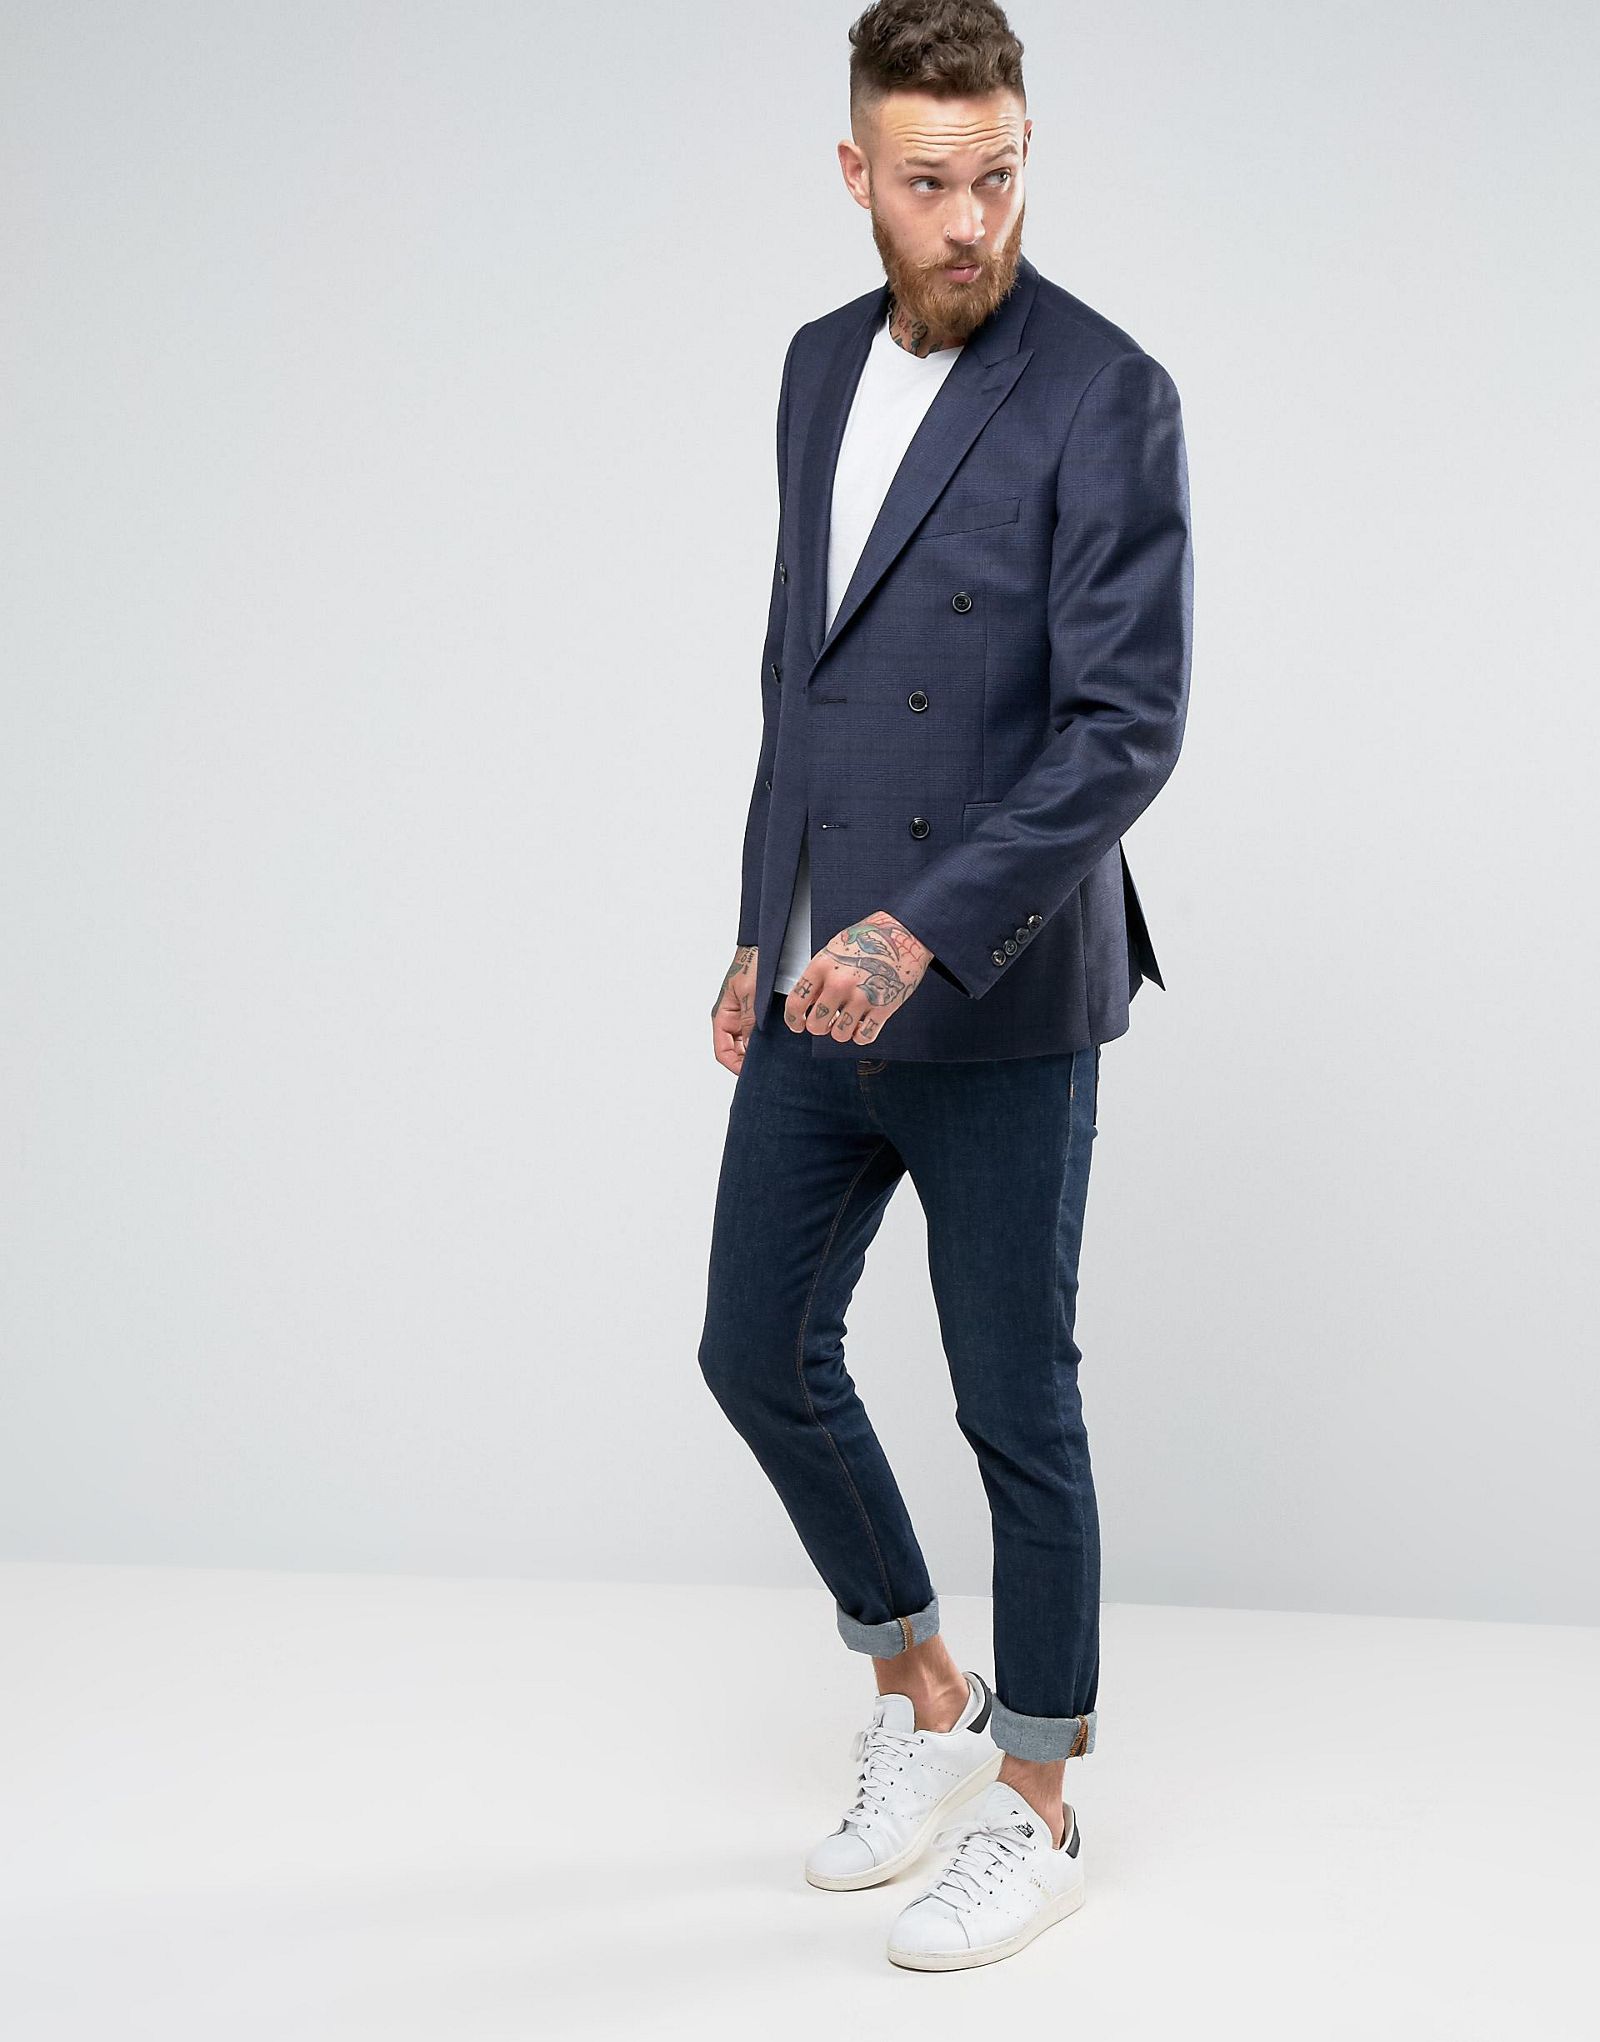 Reiss Double Breasted Check Blazer in Slim Fit